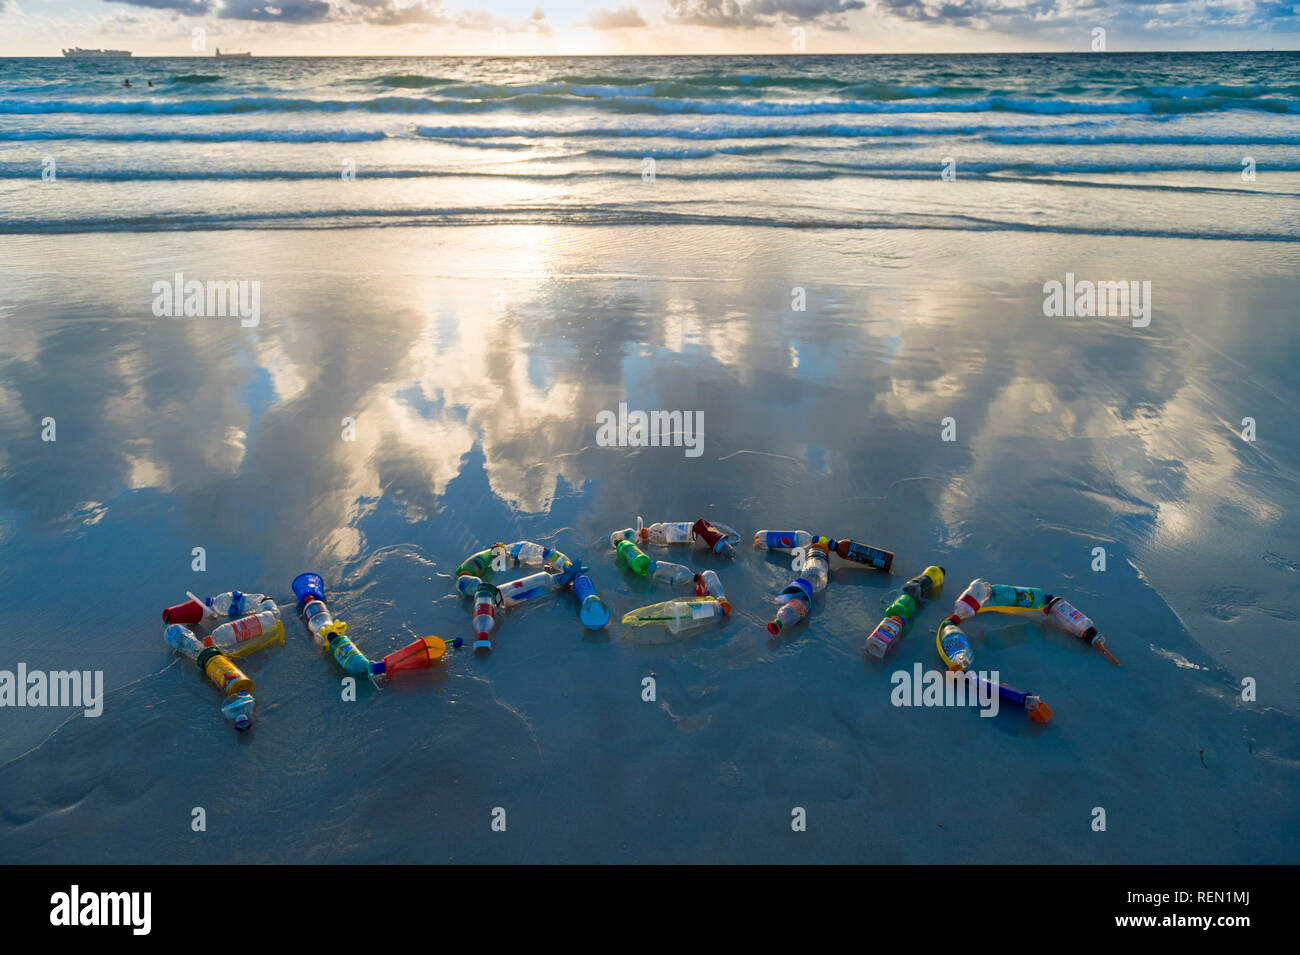 MIAMI - SEPTEMBER, 2018: Plastic awareness message made from consumer trash found on the beach illustrating the current environmental pollution crisis Stock Photo